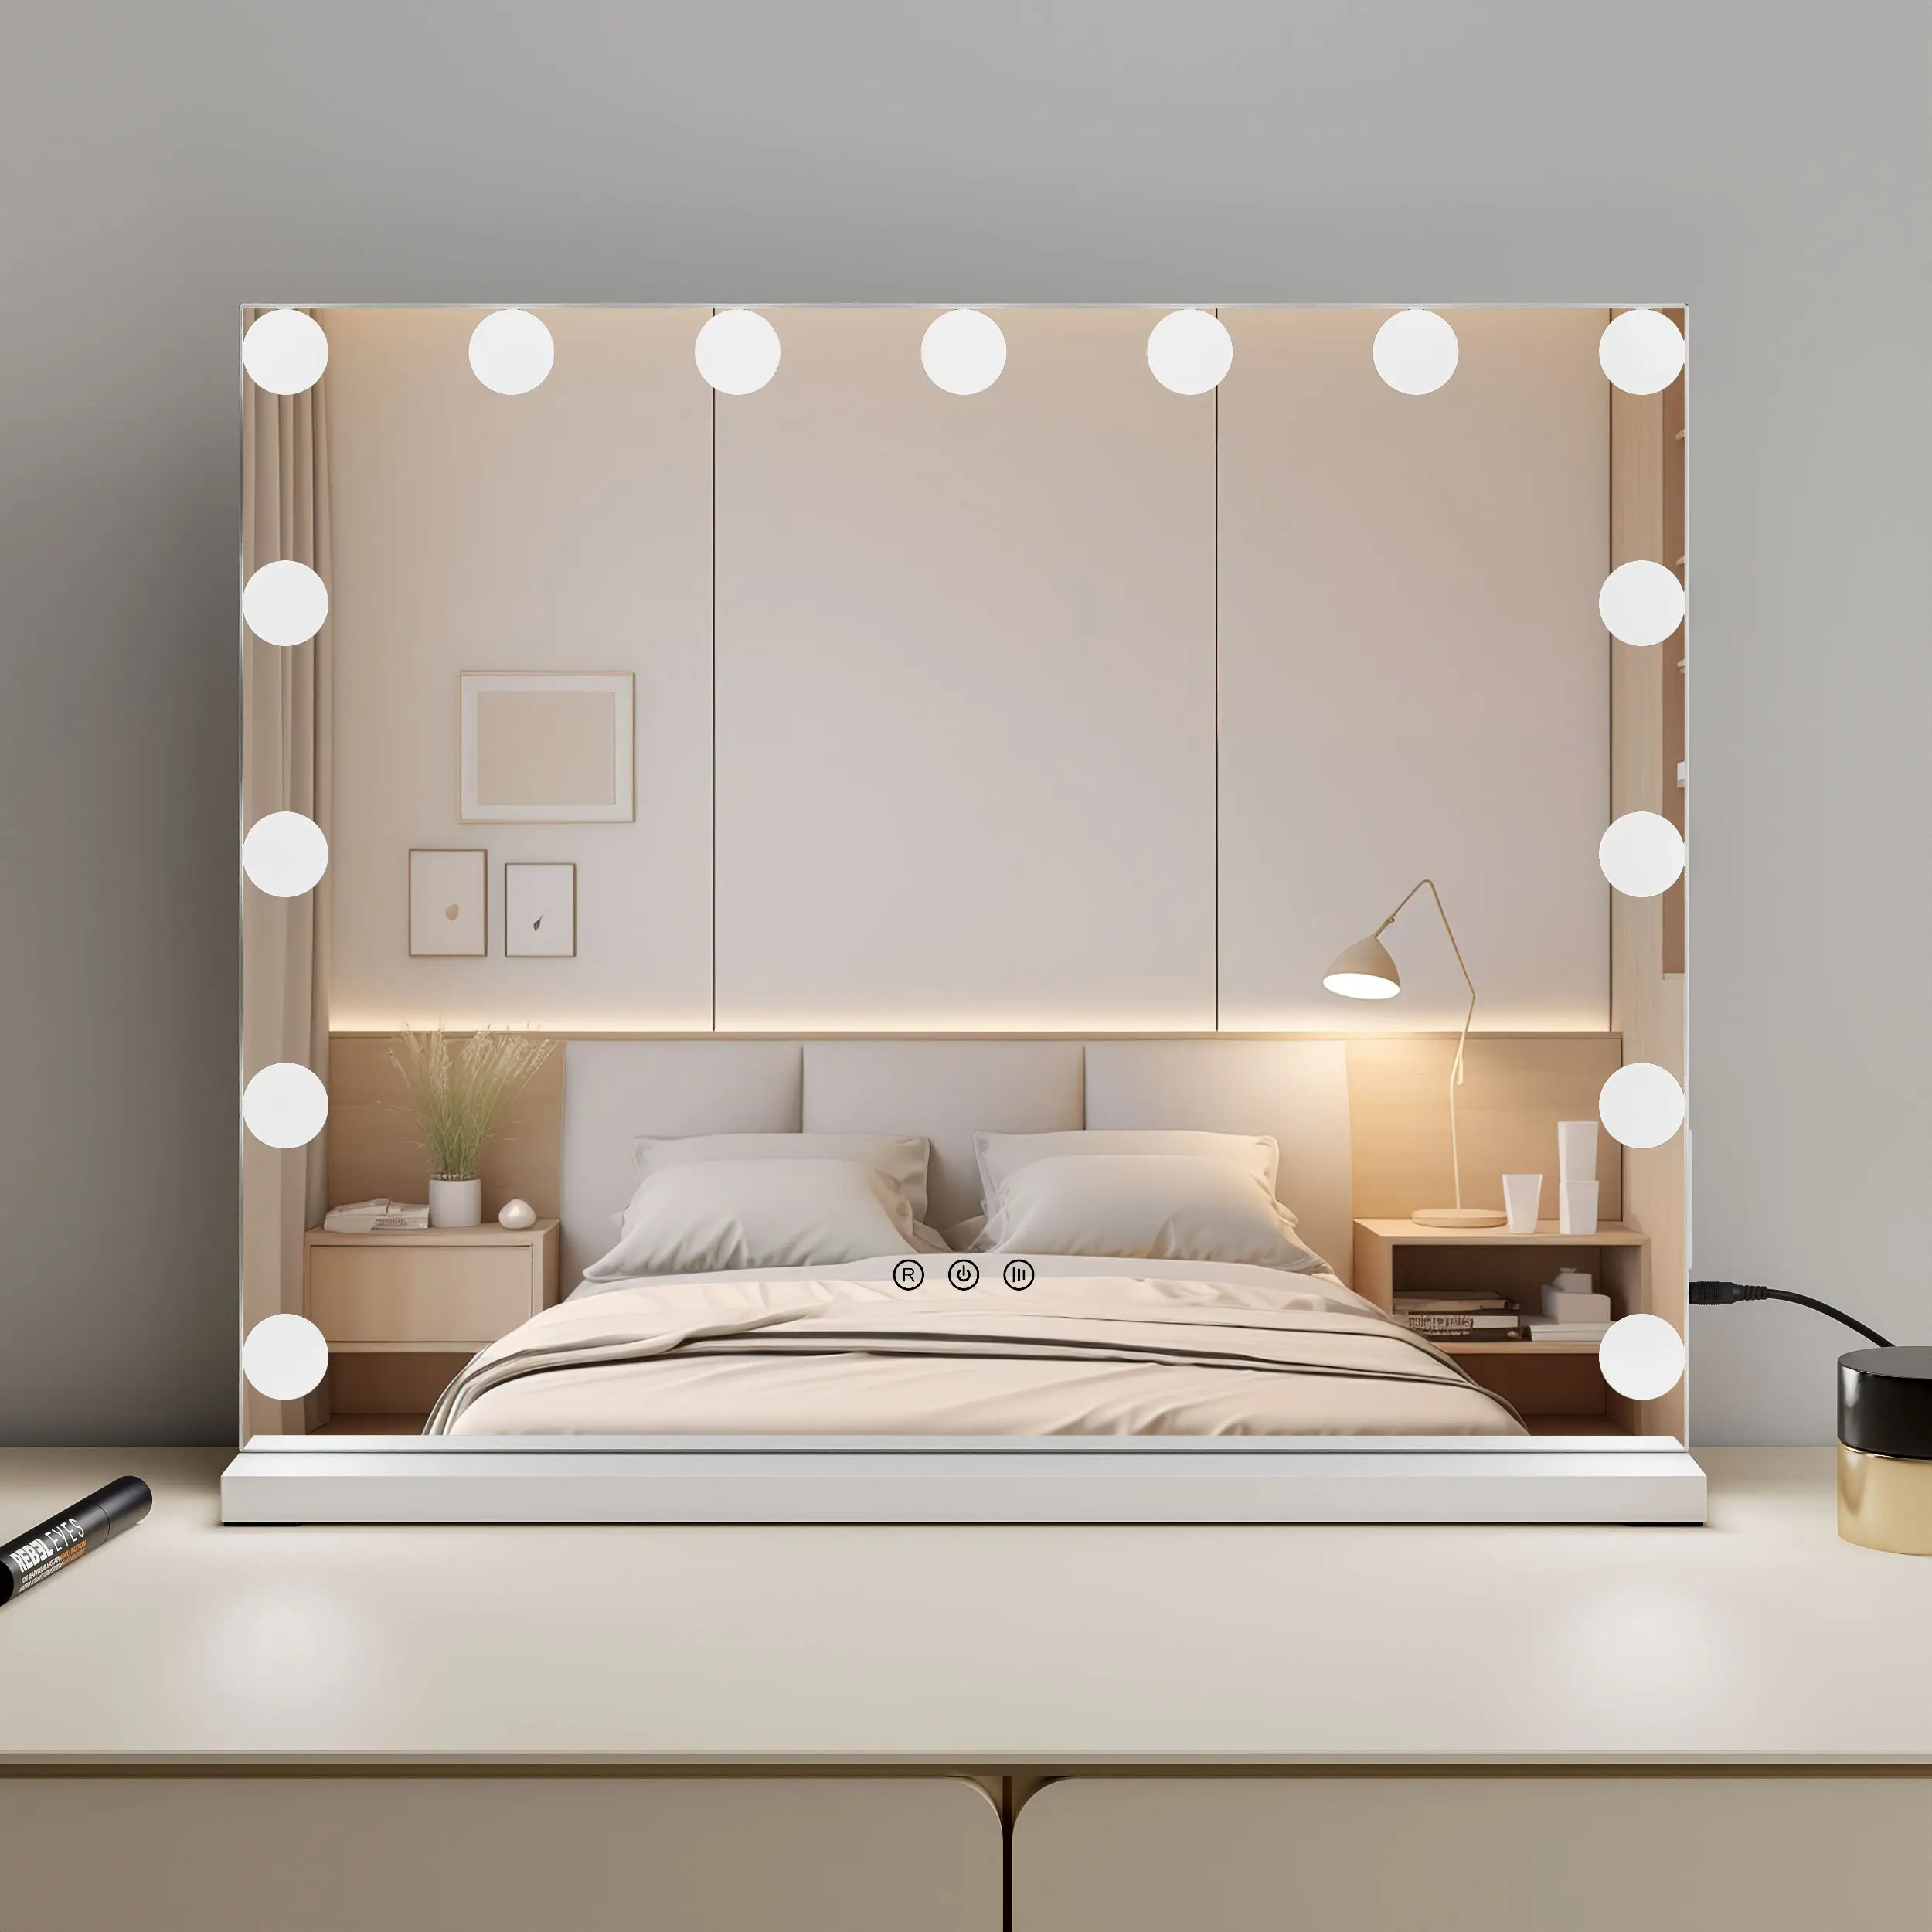 Custom 15 Dimmable Bulbs Touch Sensor Switch 58x46cm Lighted Makeup Vanity Mirror With Led Light Manufacturer Hollywood Mirror